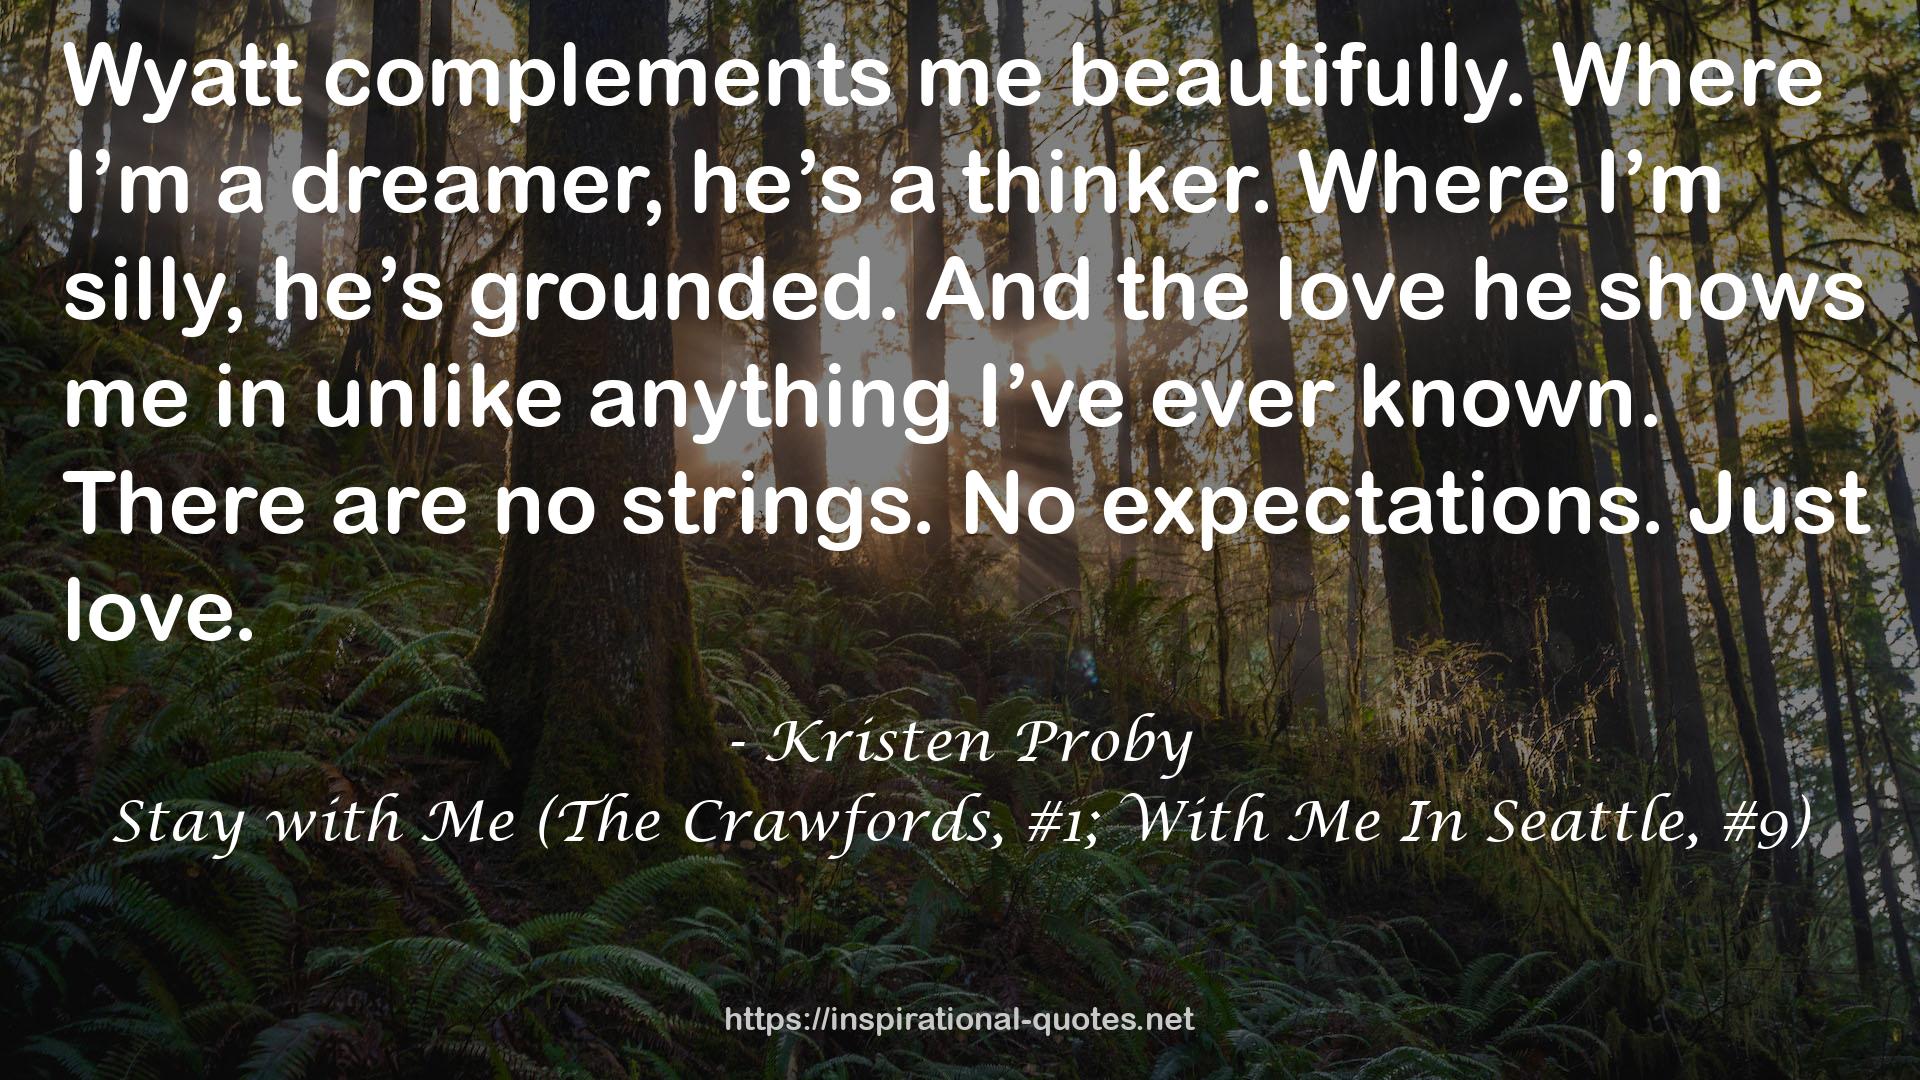 Stay with Me (The Crawfords, #1; With Me In Seattle, #9) QUOTES